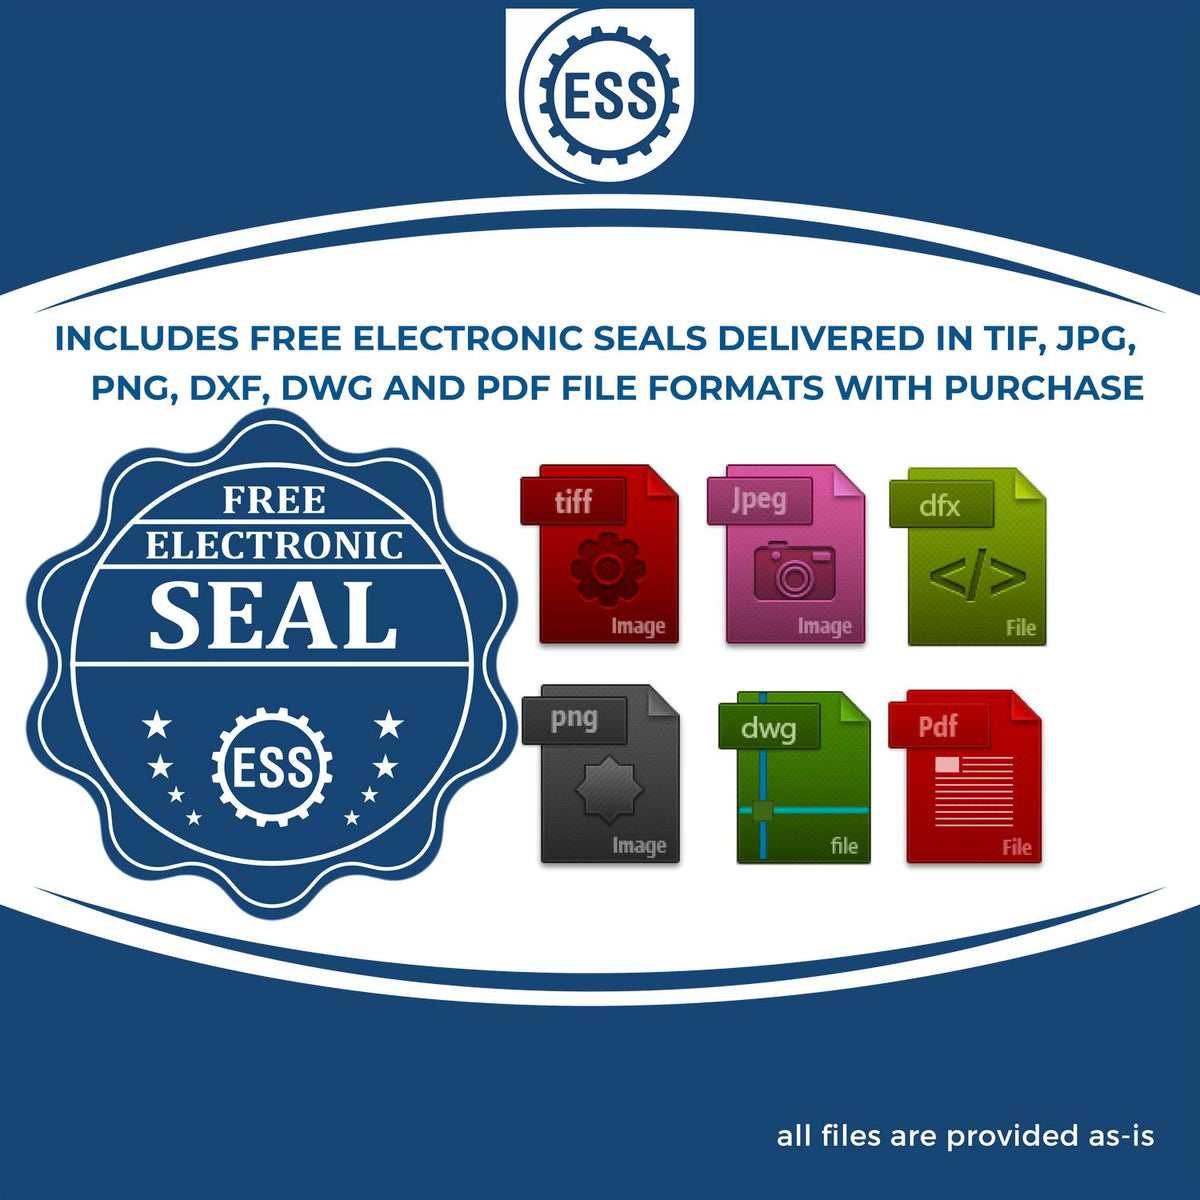 An infographic for the free electronic seal for the Premium MaxLight Pre-Inked Minnesota Geology Stamp illustrating the different file type icons such as DXF, DWG, TIF, JPG and PNG.